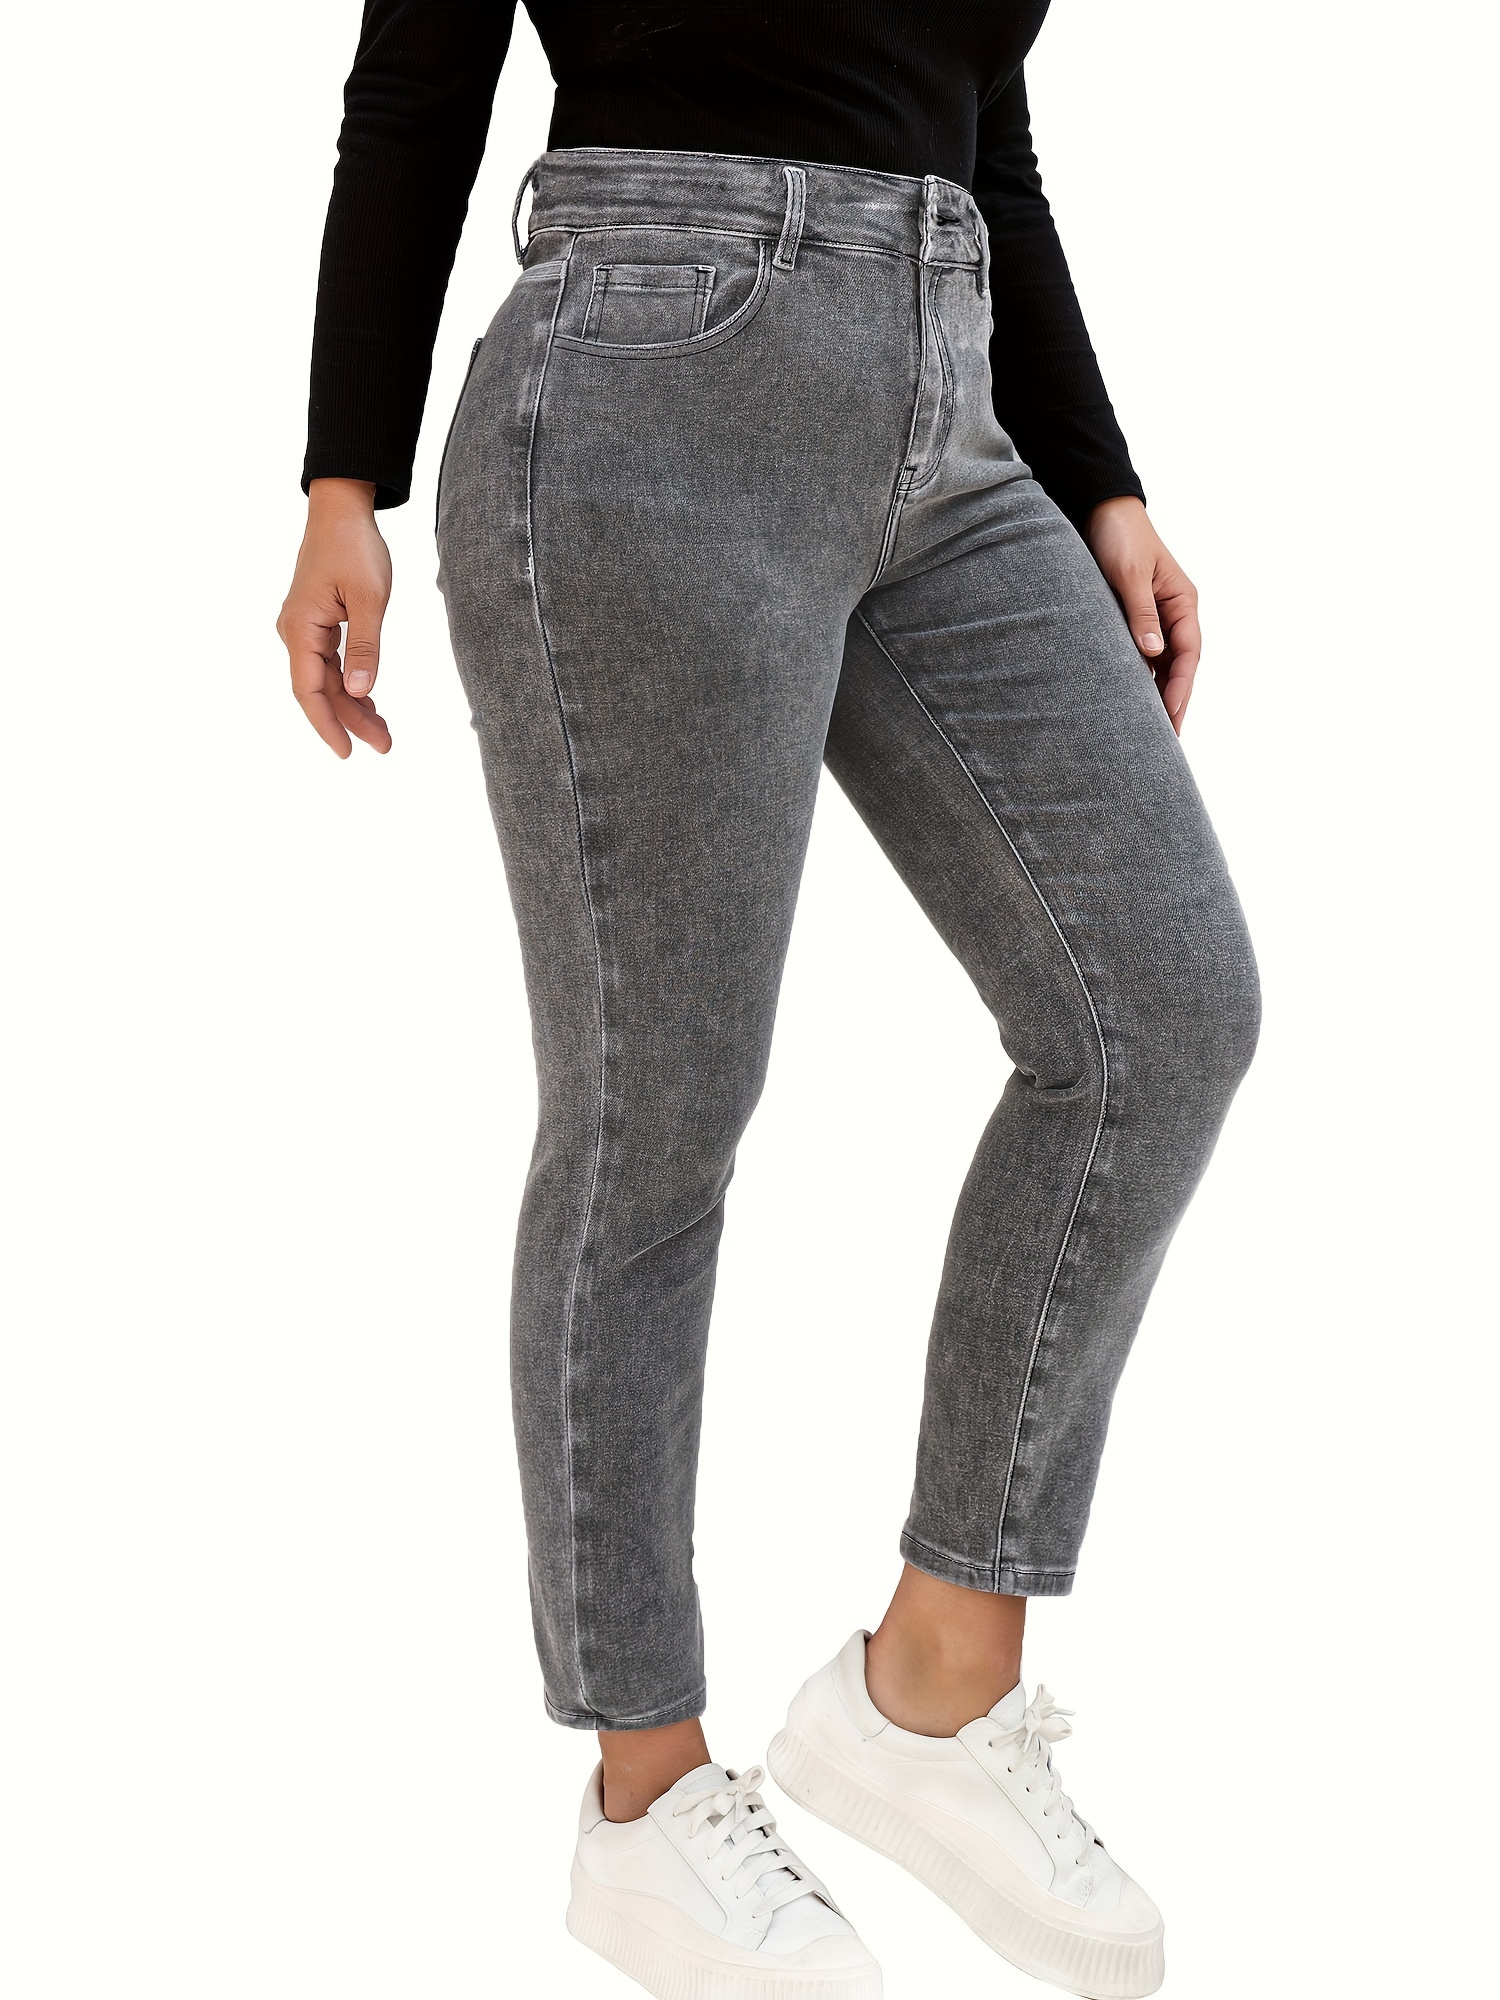 Plus Size Casual Jeans, Women's Plus High * Tummy Control High Stretch  Washed Skinny Jeans